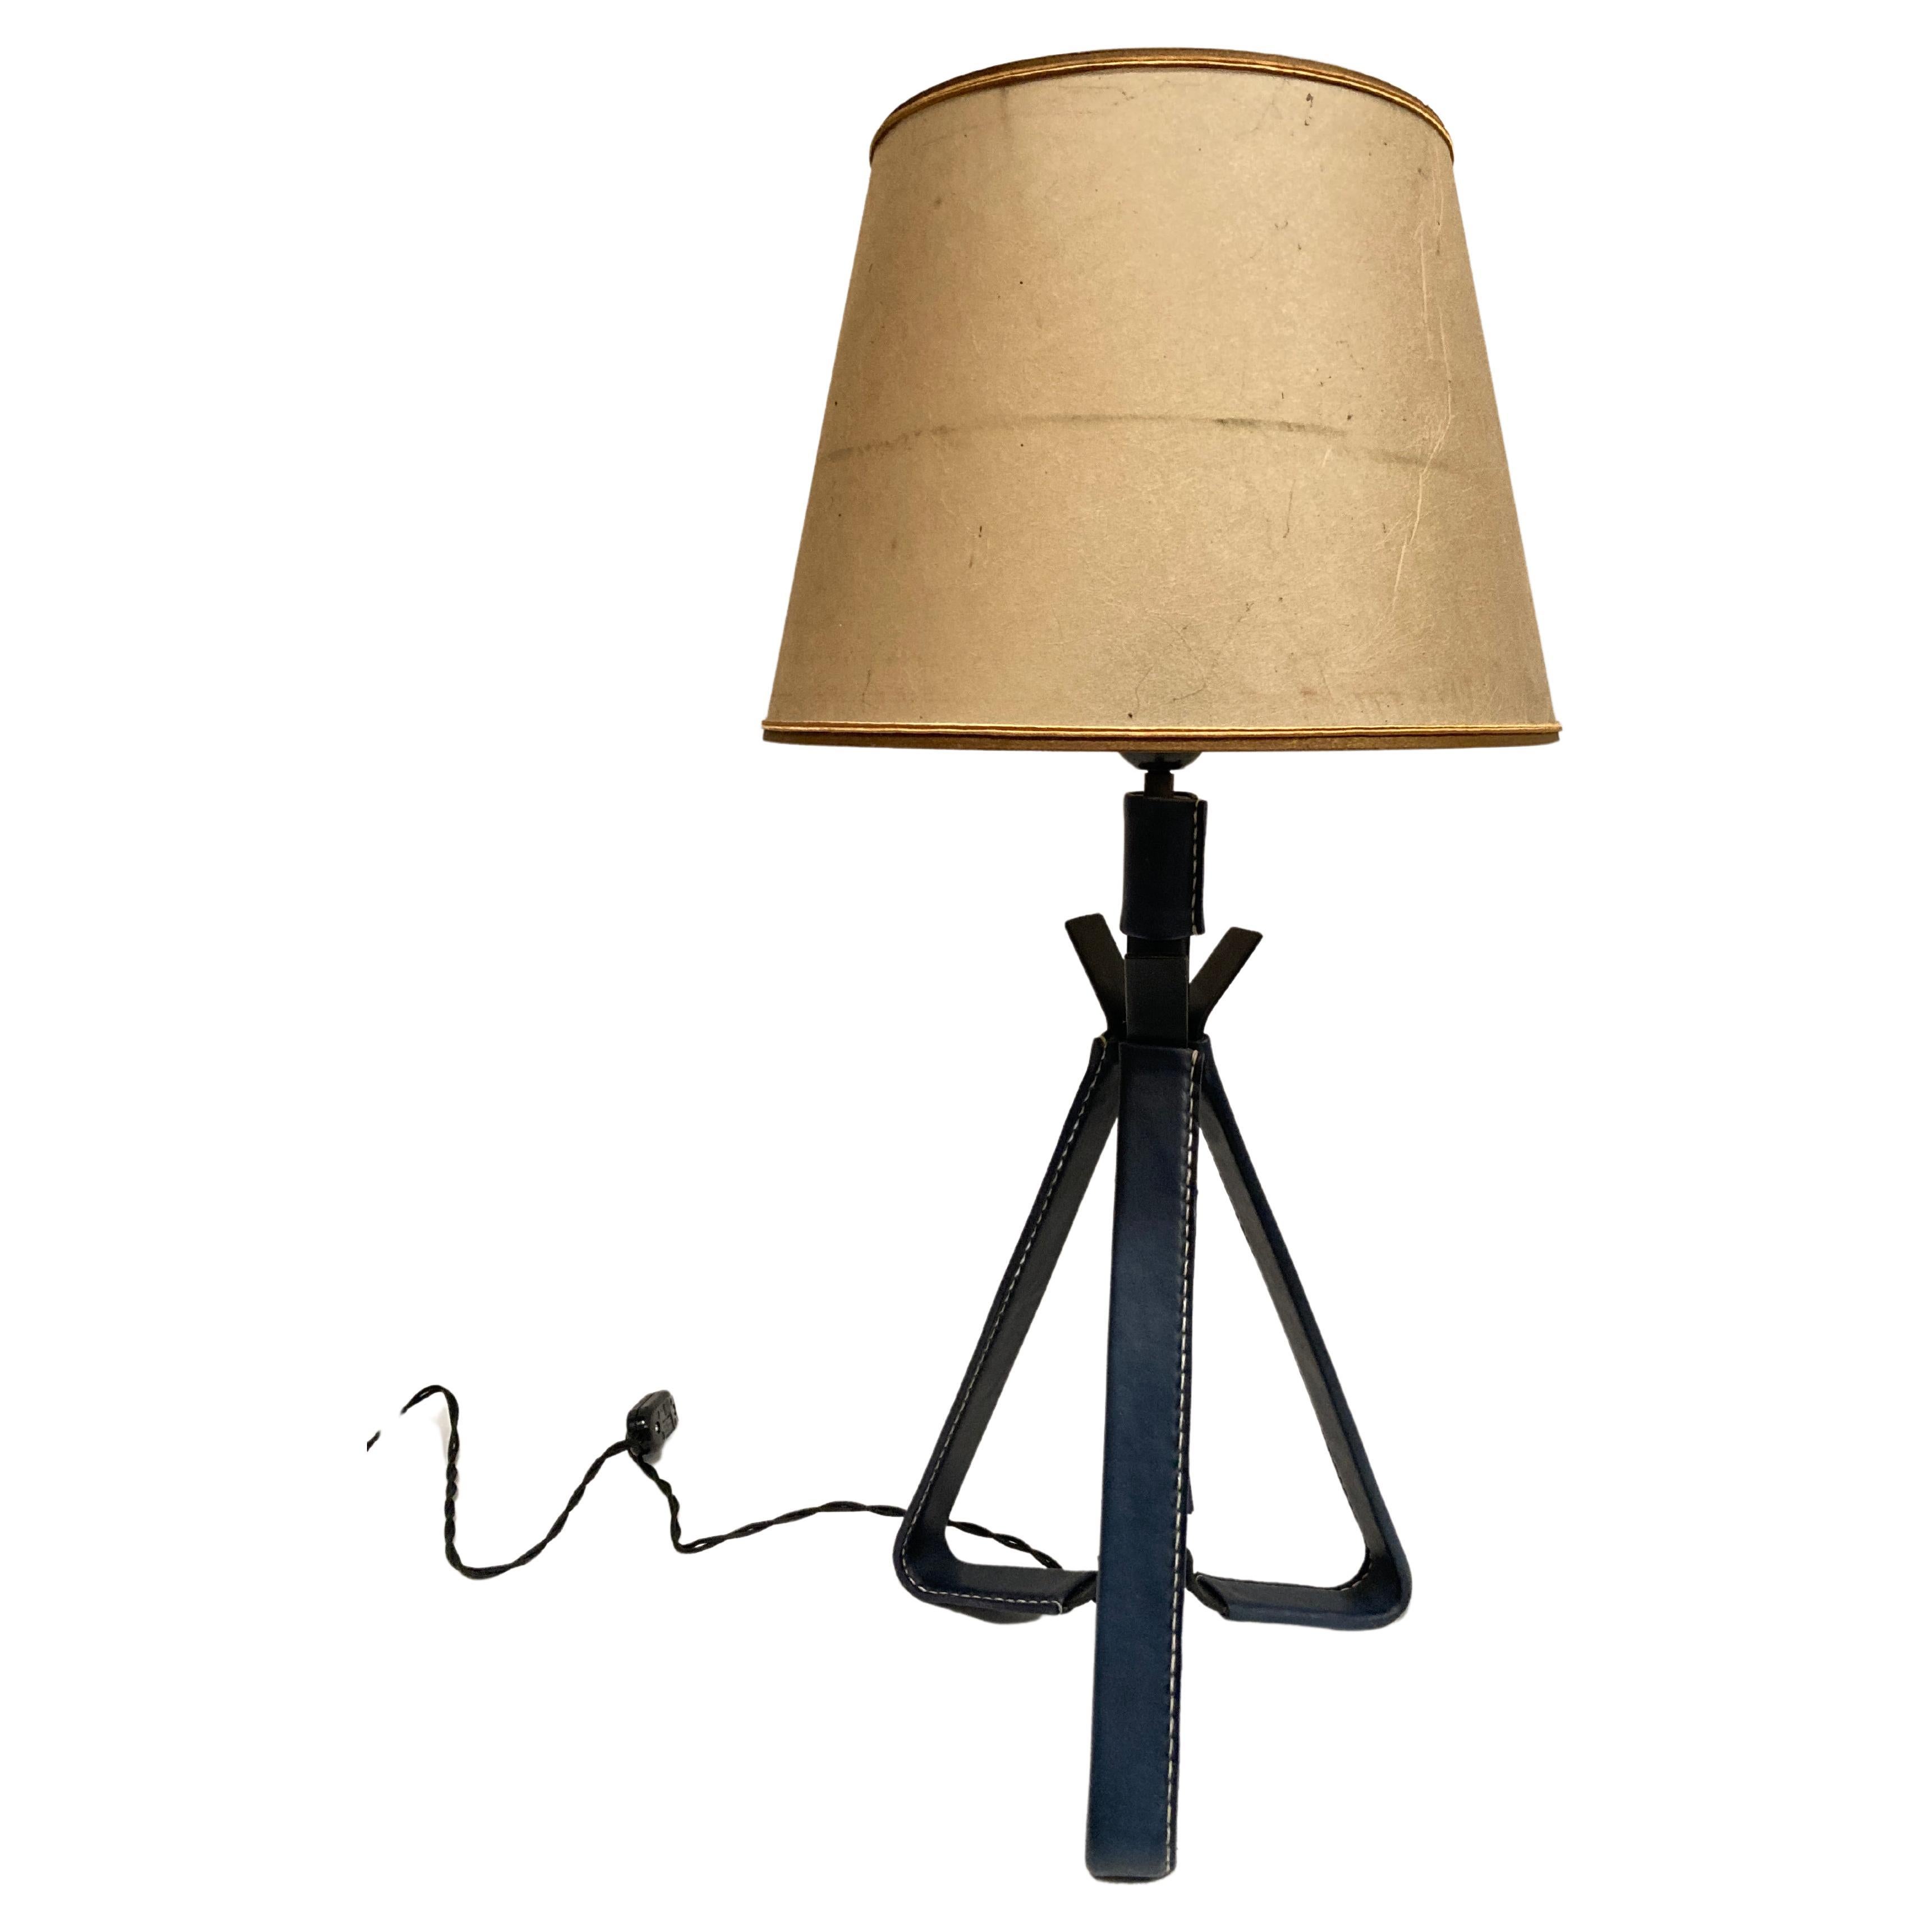 1950's Stitched leather table lamp by Jacques Adnet